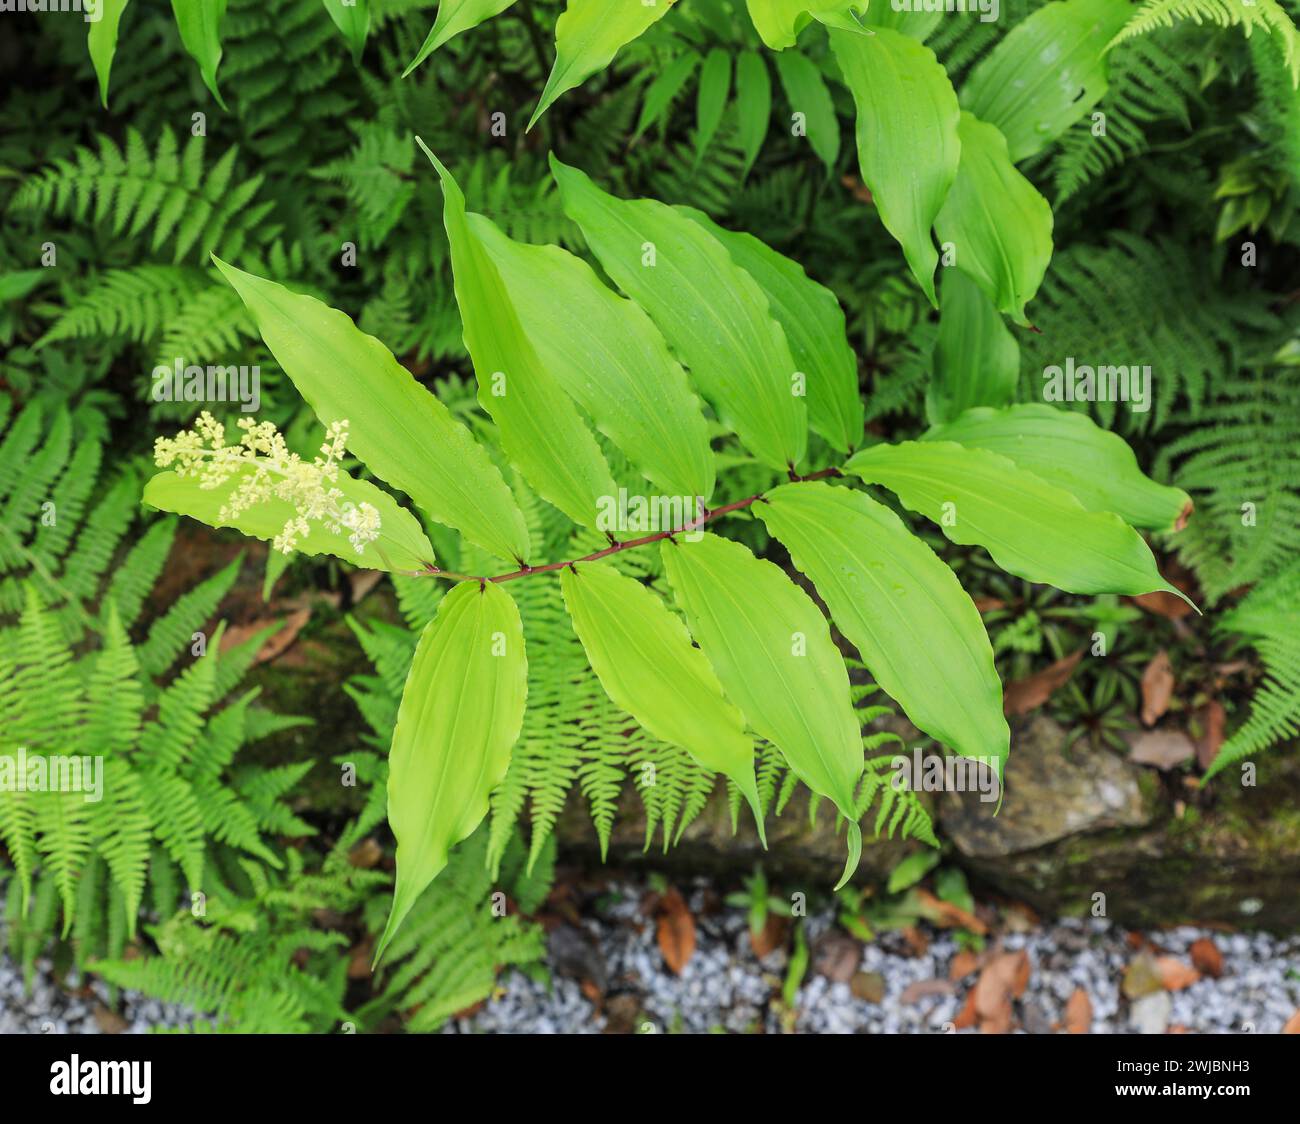 The white flowers of Maianthemum racemosum, the treacleberry, feathery false lily of the valley, false Solomon's seal, Solomon's plume or false spiken Stock Photo